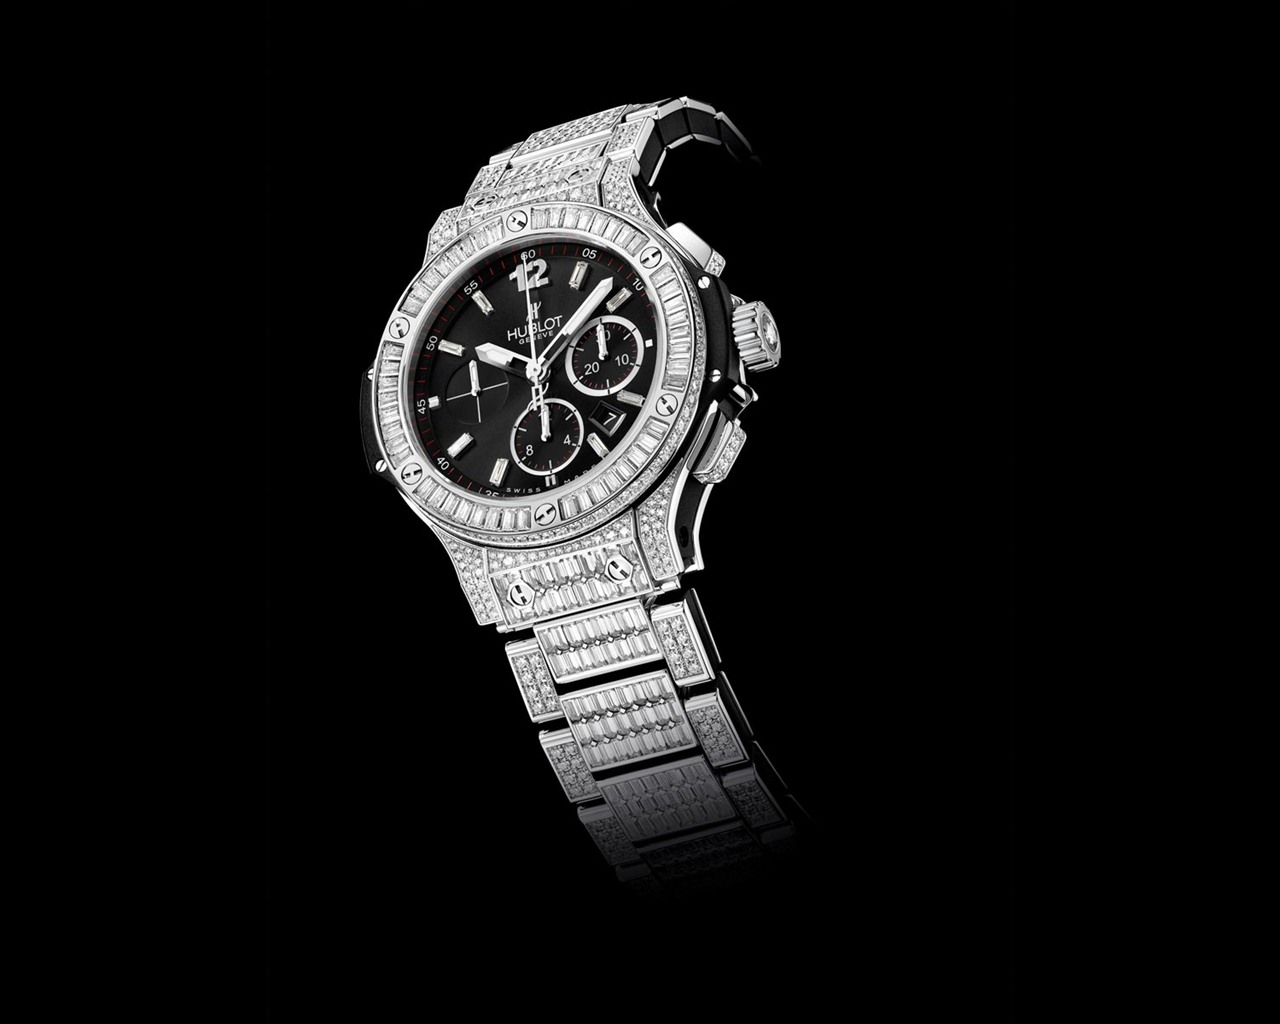 World famous watches wallpapers (2) #2 - 1280x1024